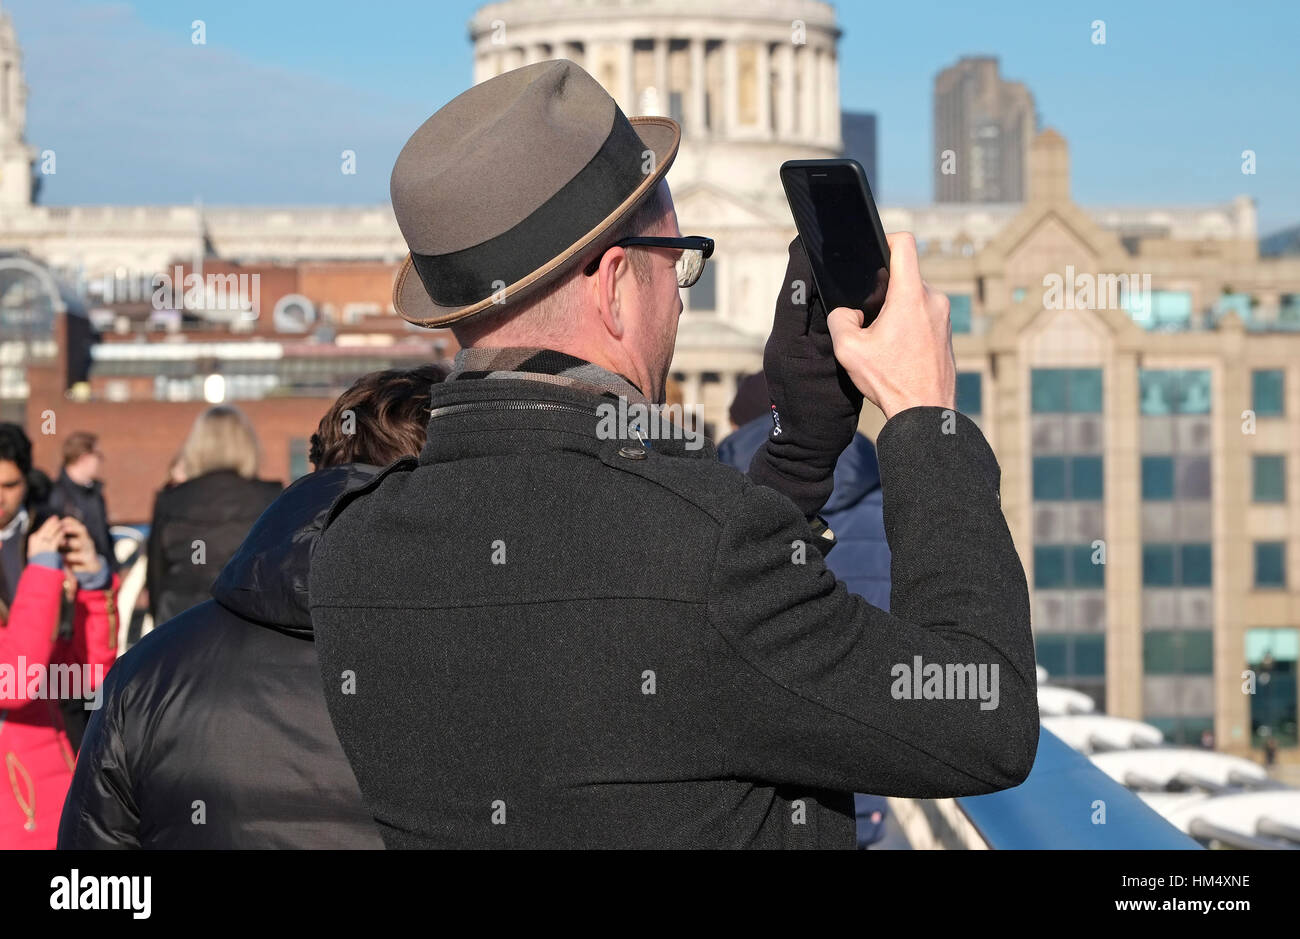 man taking photograph with mobile phone in london, england Stock Photo